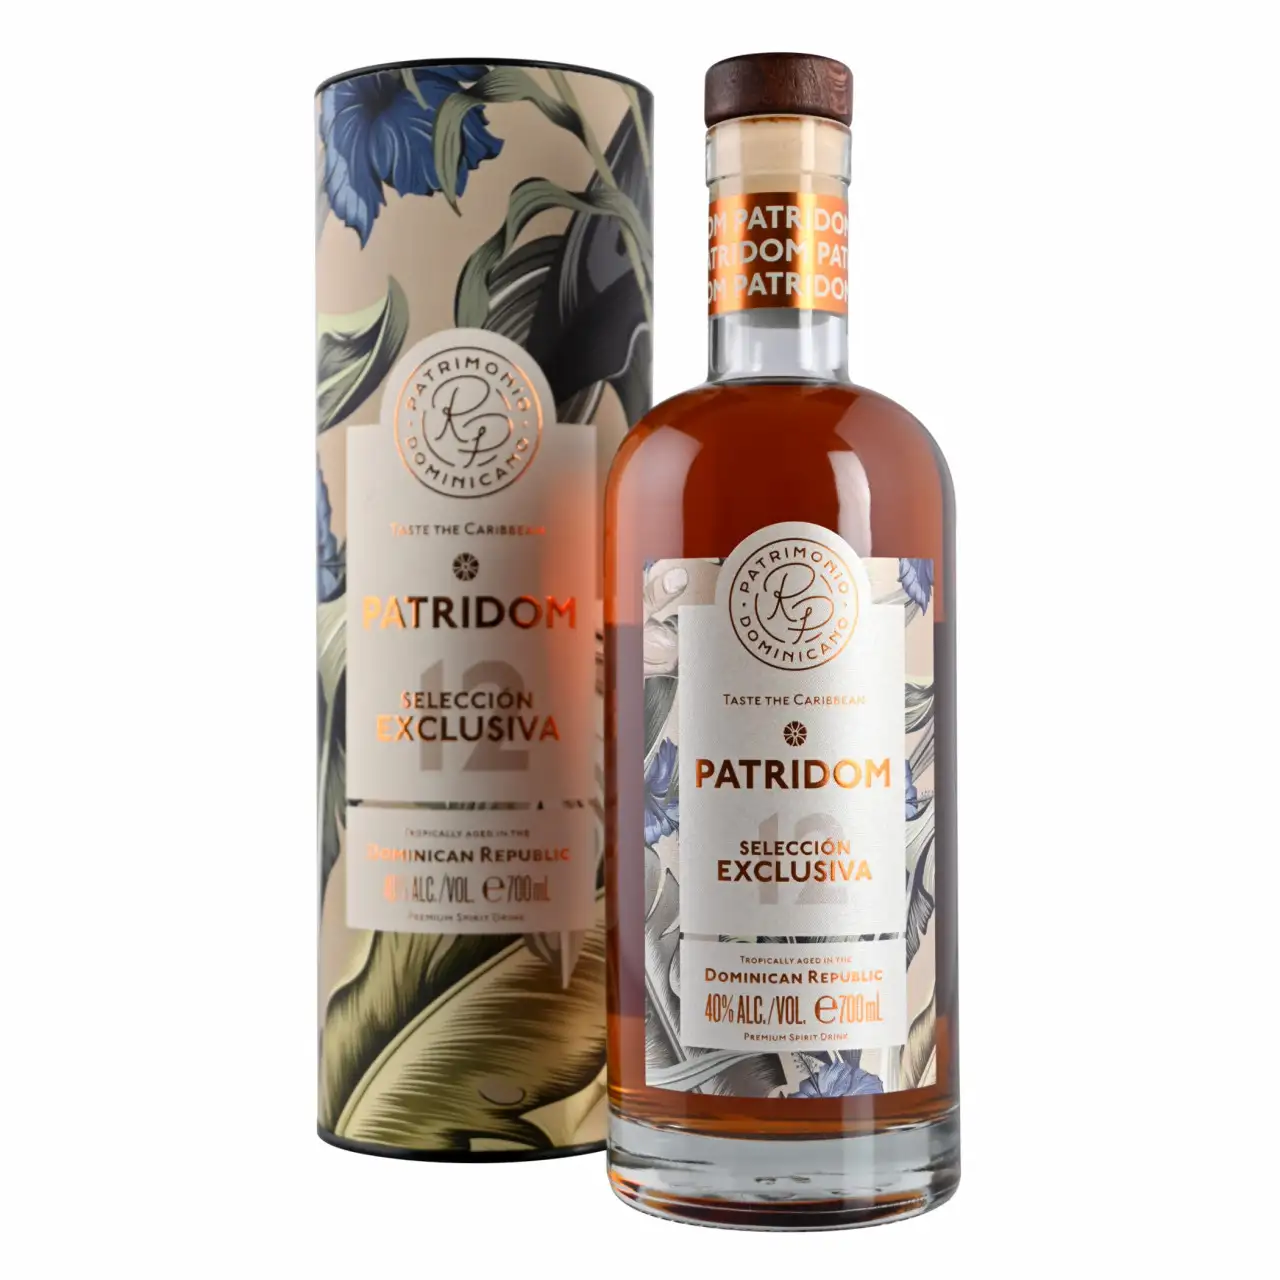 Image of the front of the bottle of the rum Patridom Seleccion Exclusiva